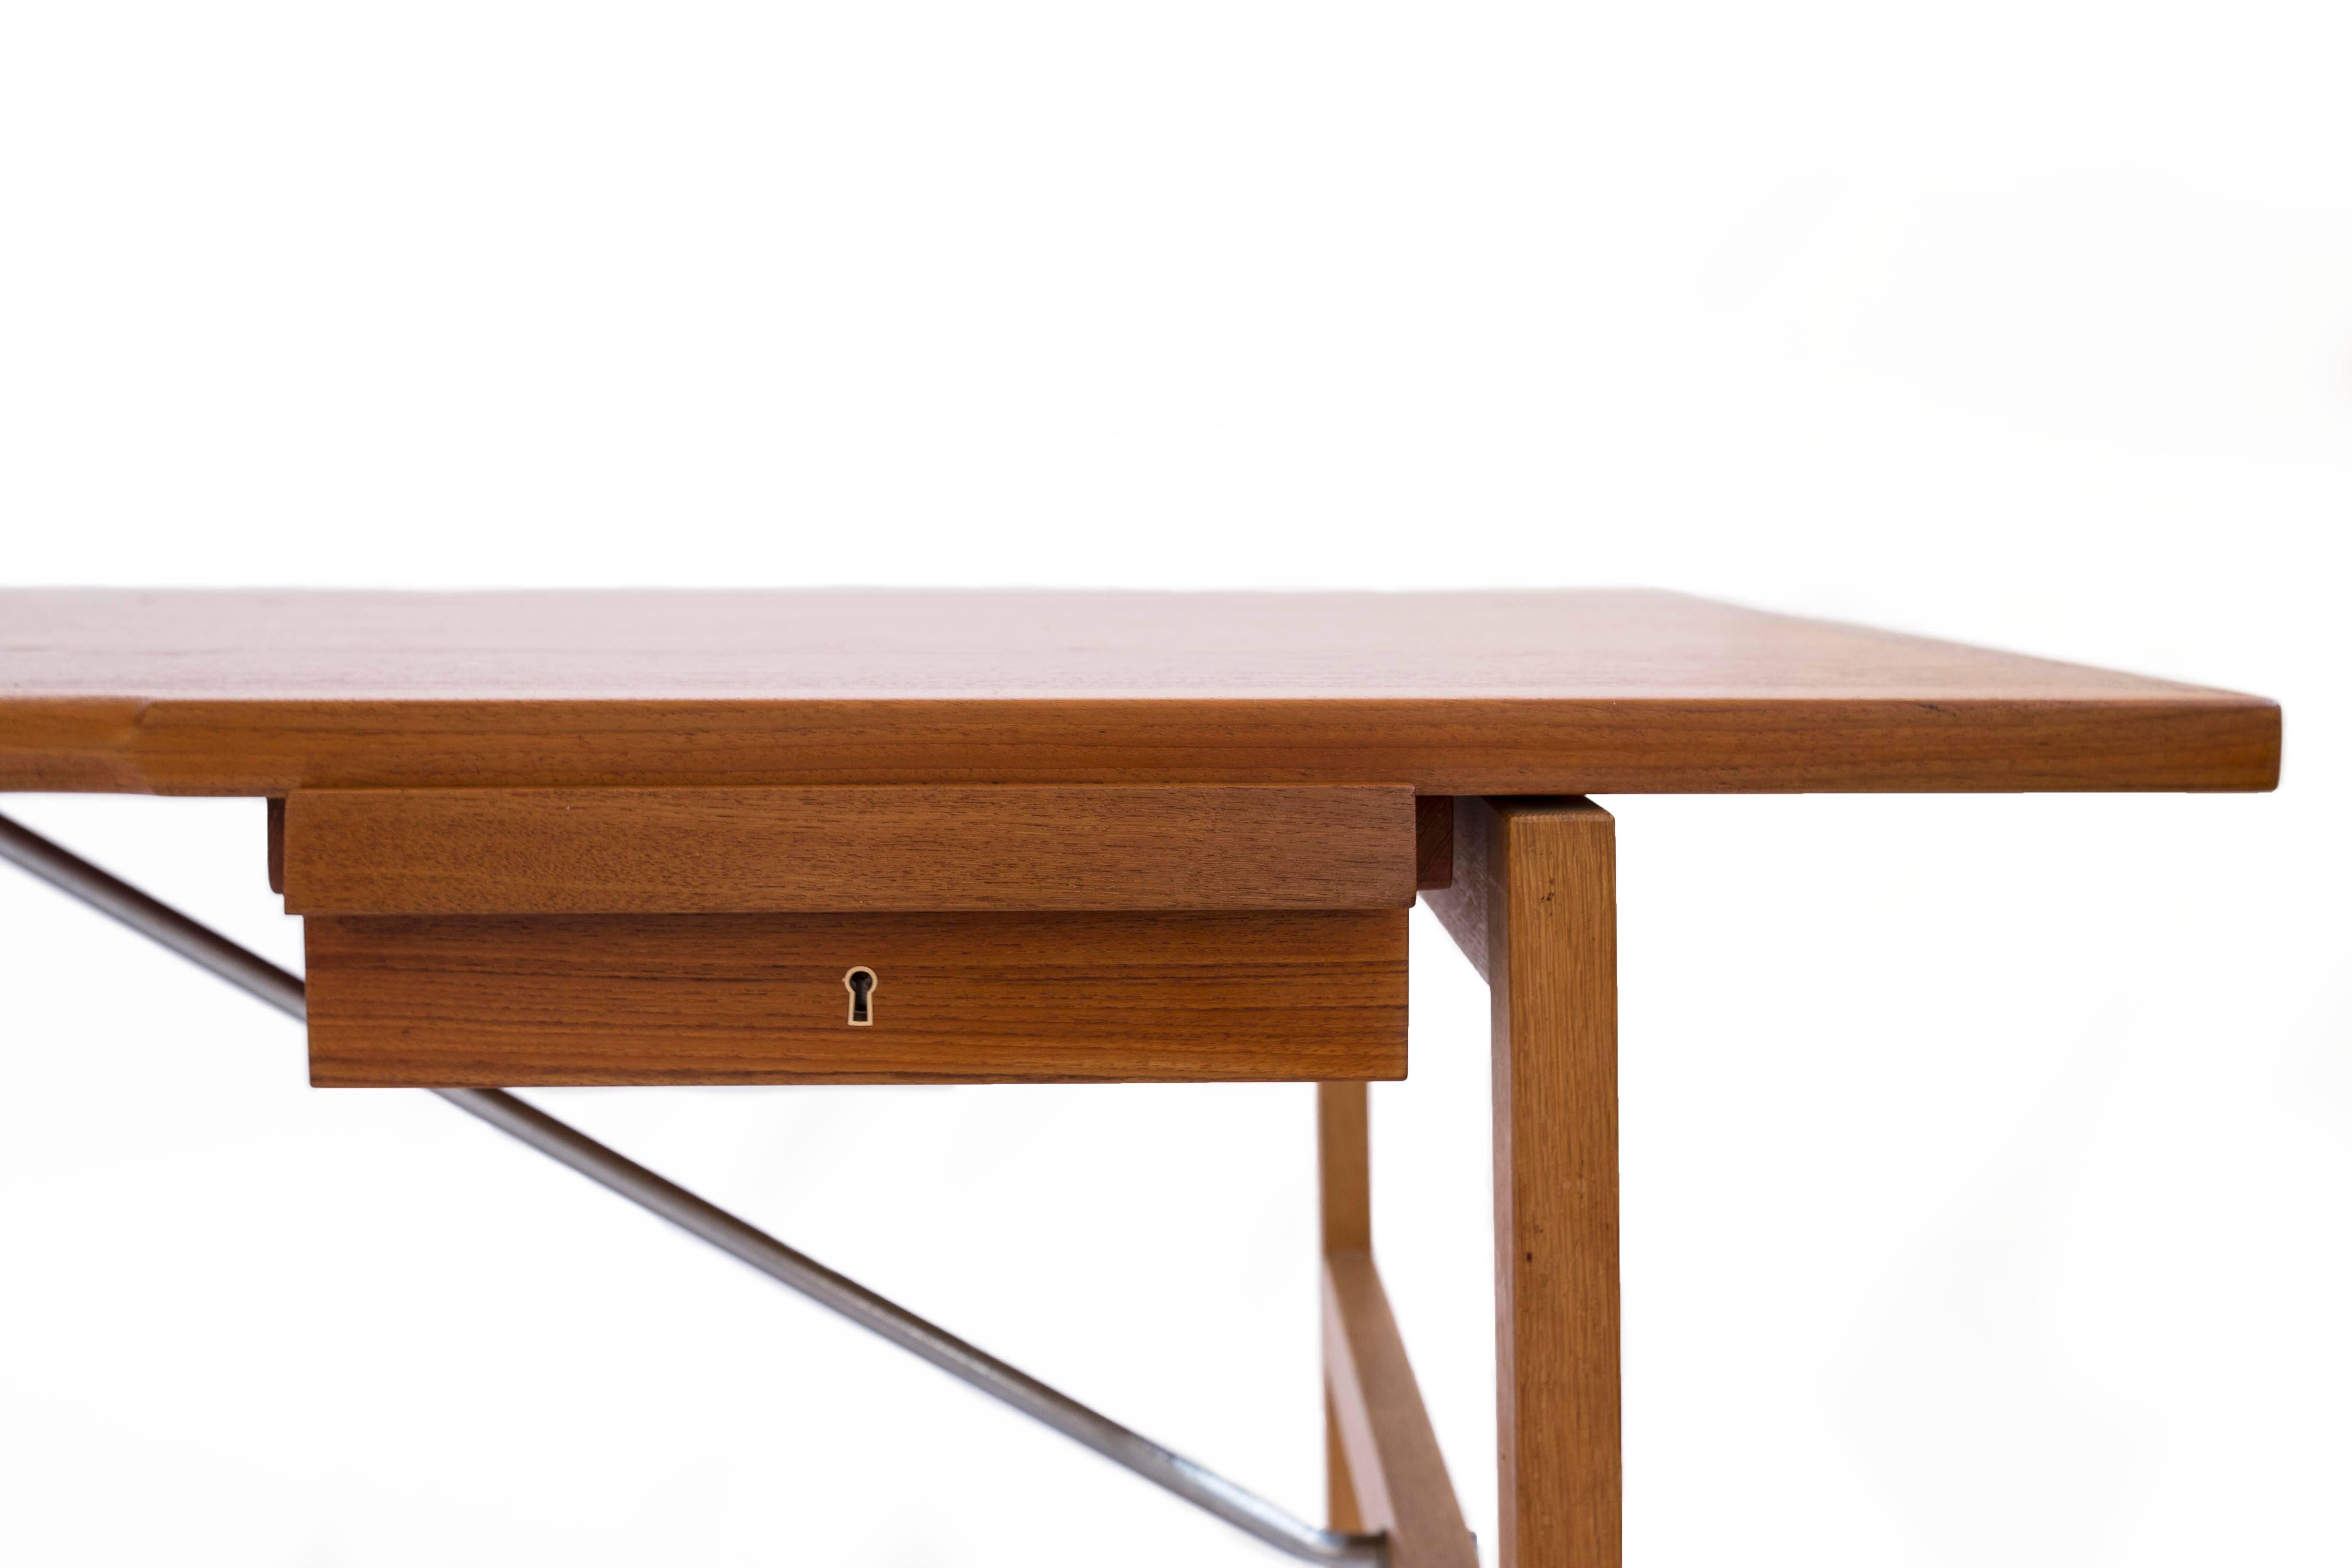 Large Hans J. Wegner freestanding worktable with oak frame, top and two drawers of teak supported by stretchers of chromed steel. 

Designed by Wegner 1964, manufactured and stamped by cabinetmaker Andreas Tuck, Denmark, model AT325A. 

Fine